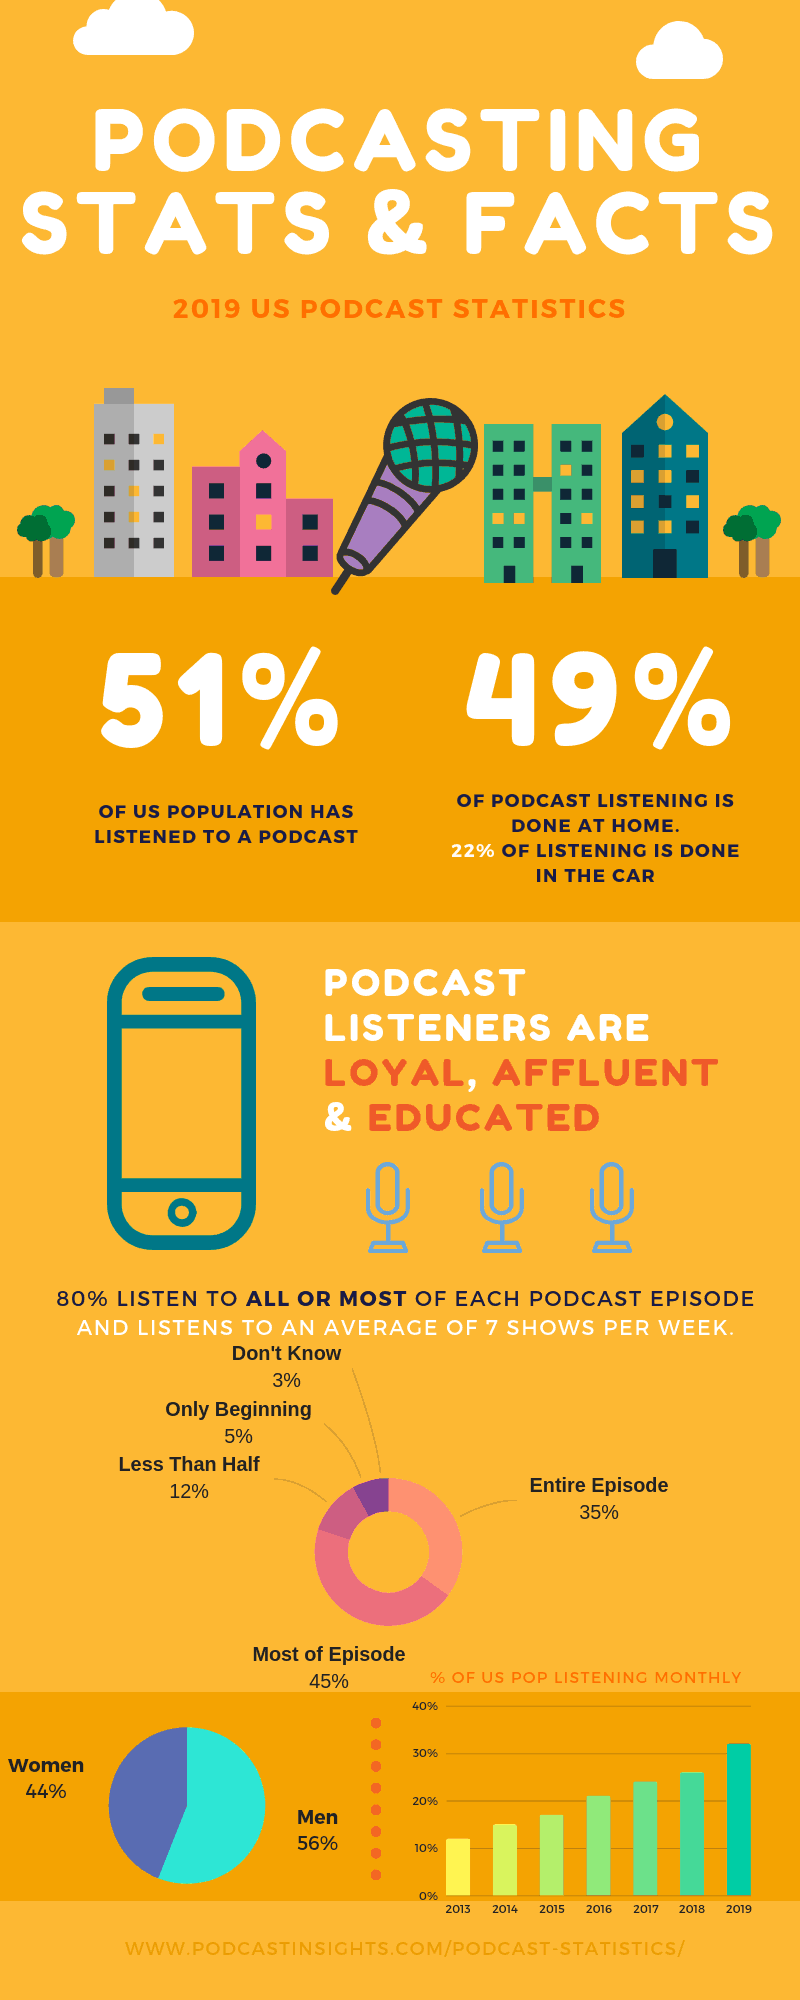 2019 US Podcast Stats & Facts Infographic BY Podcast Insights